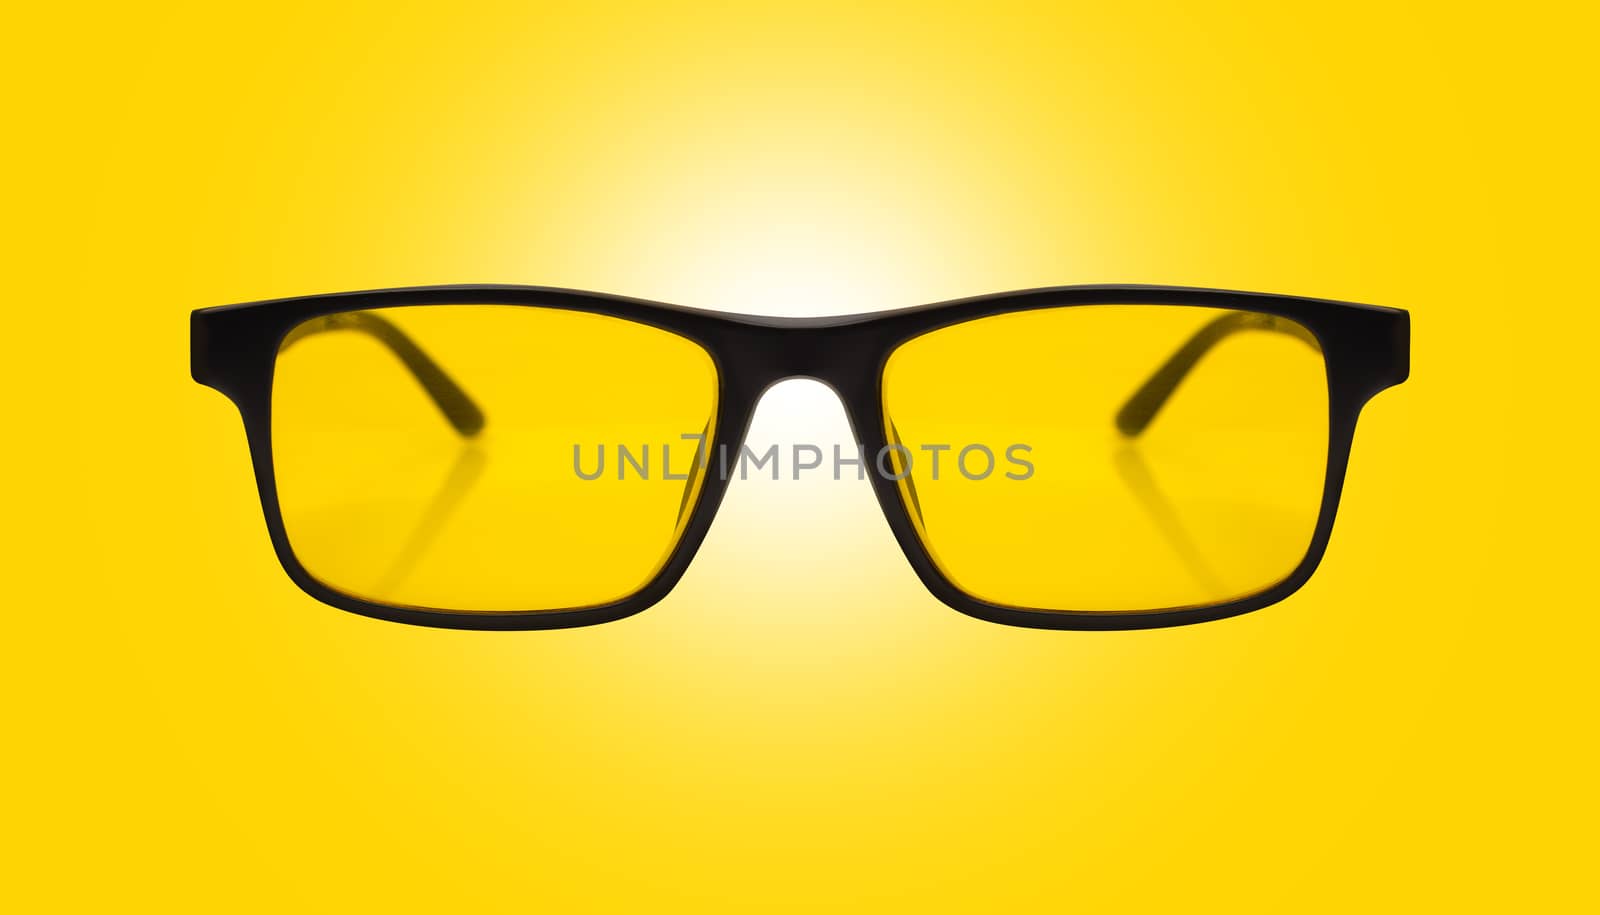 Single sunglasses with black plastic frame and yellow glass by SlayCer